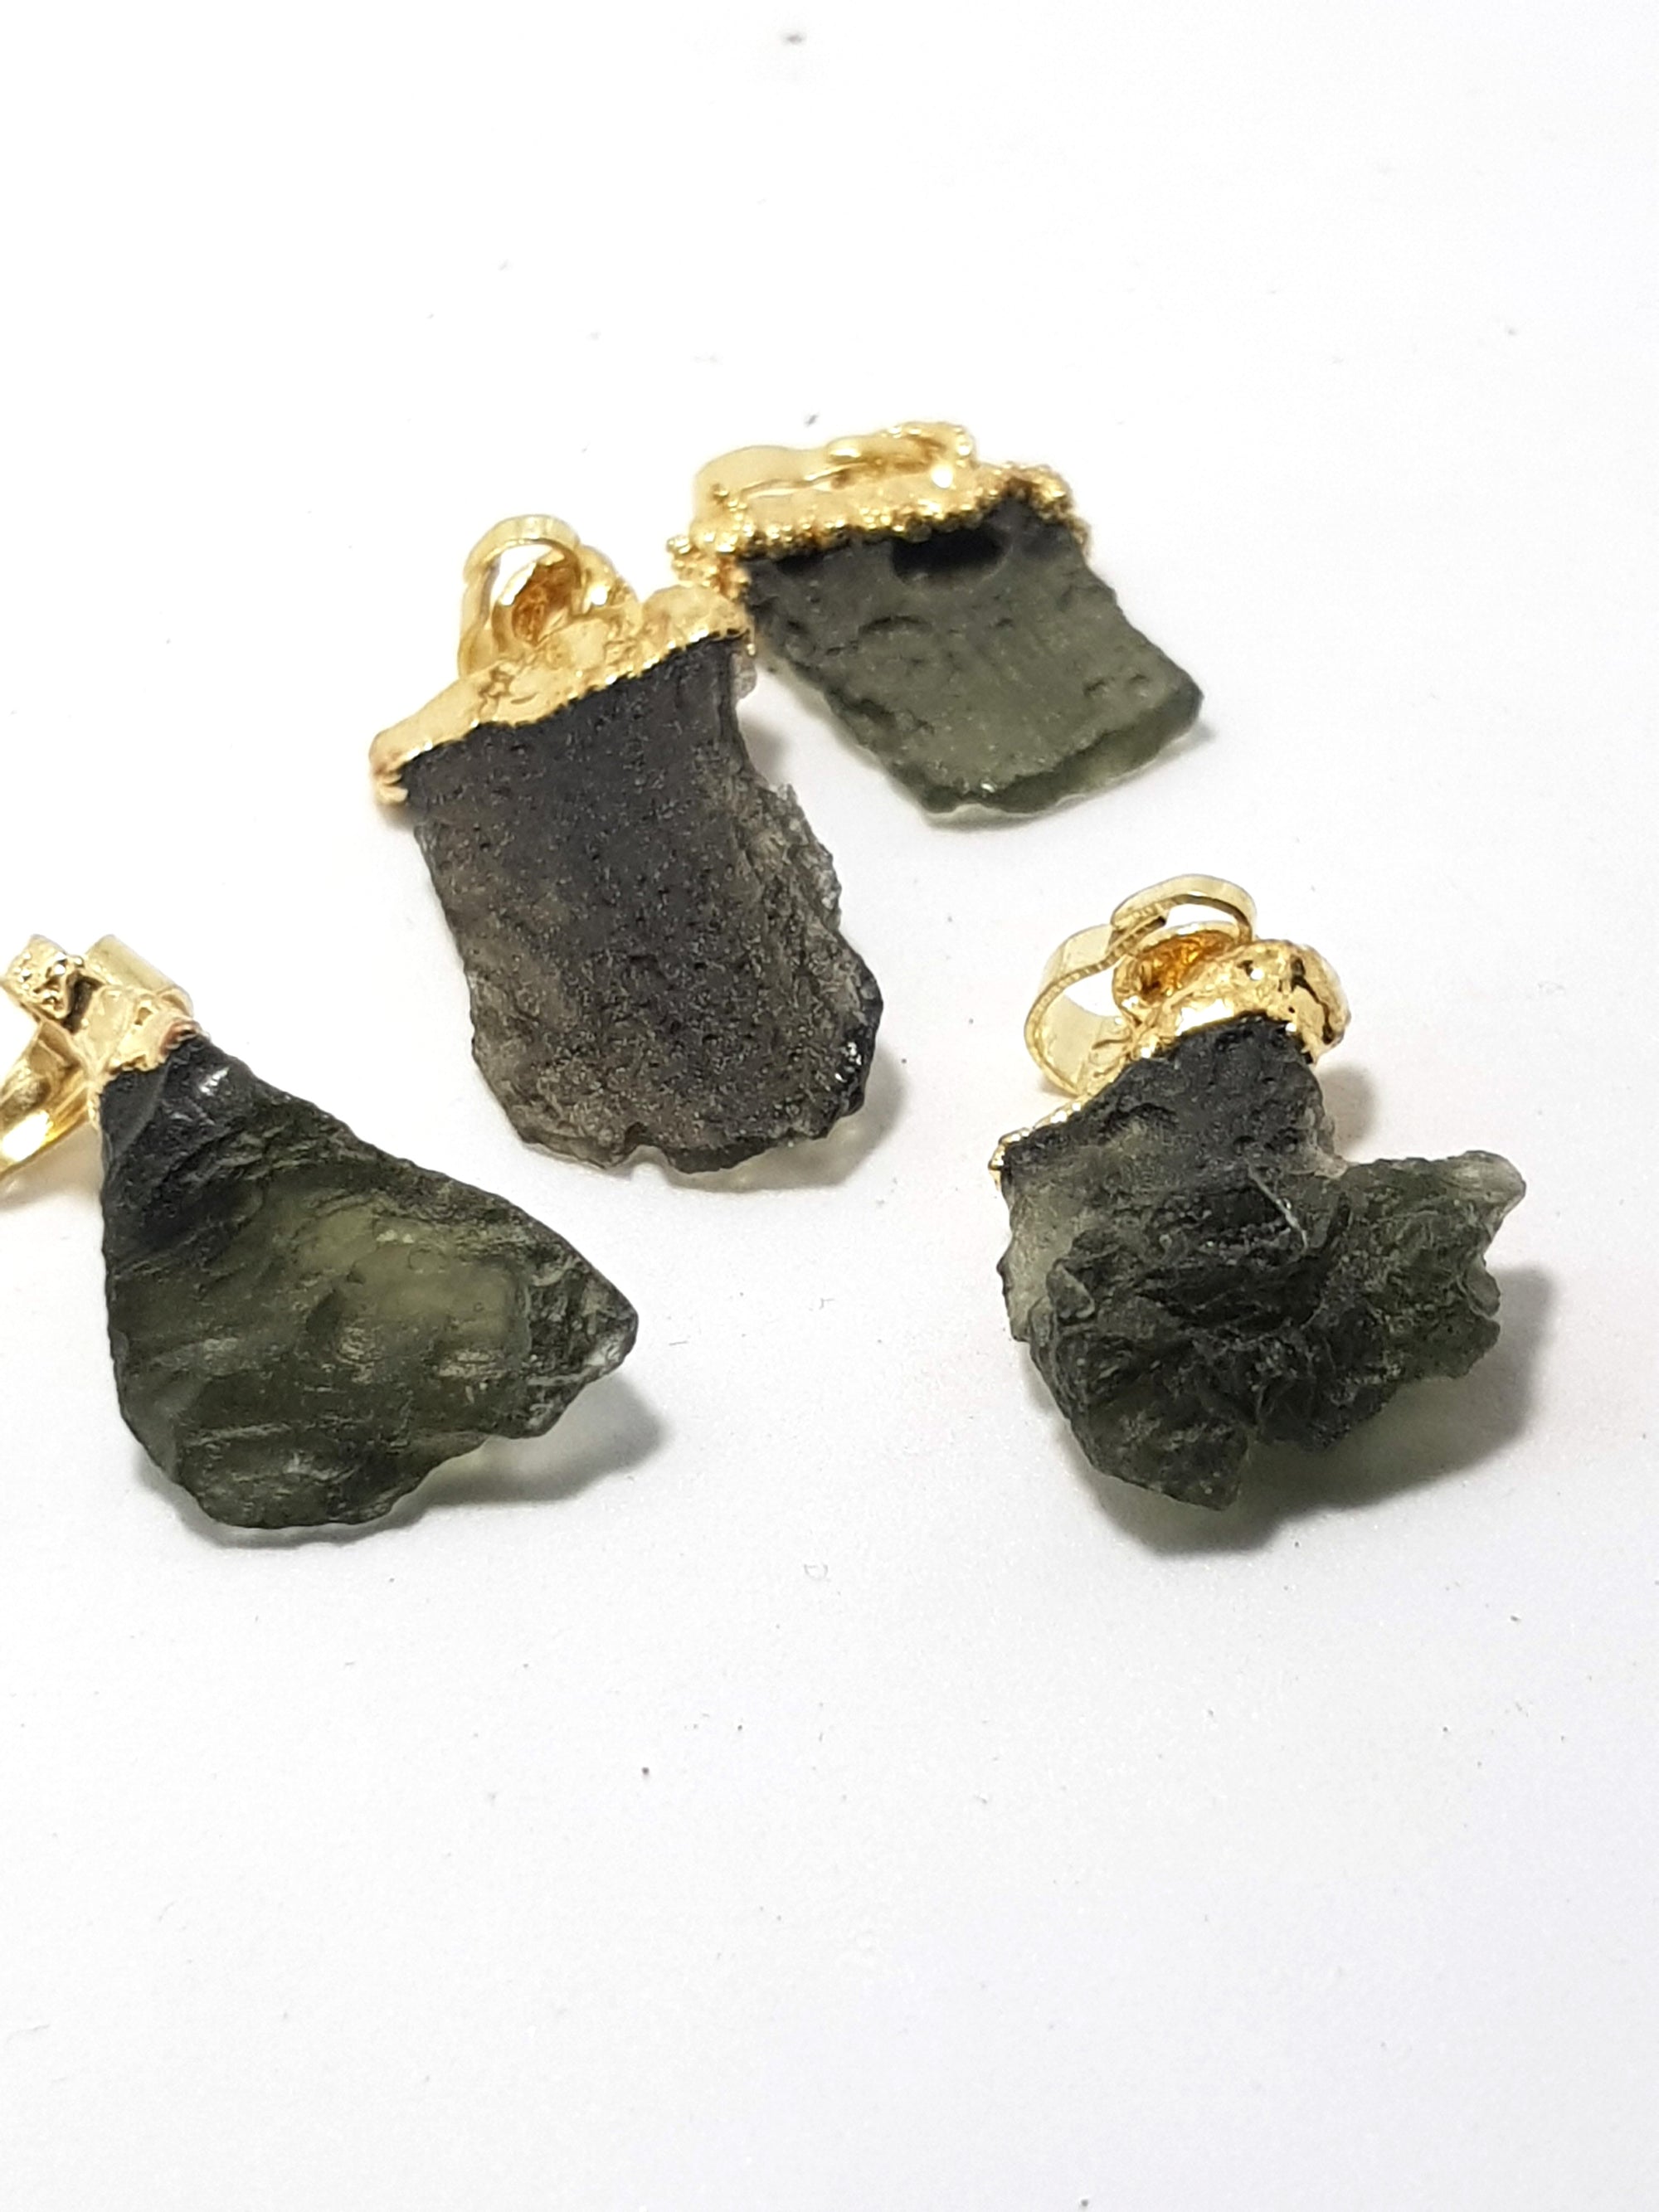 four moldavite pendants. The samples are green, translucent and have the distinctive wrinkled rind. They are end capped with a gold coloured material to make pendants.